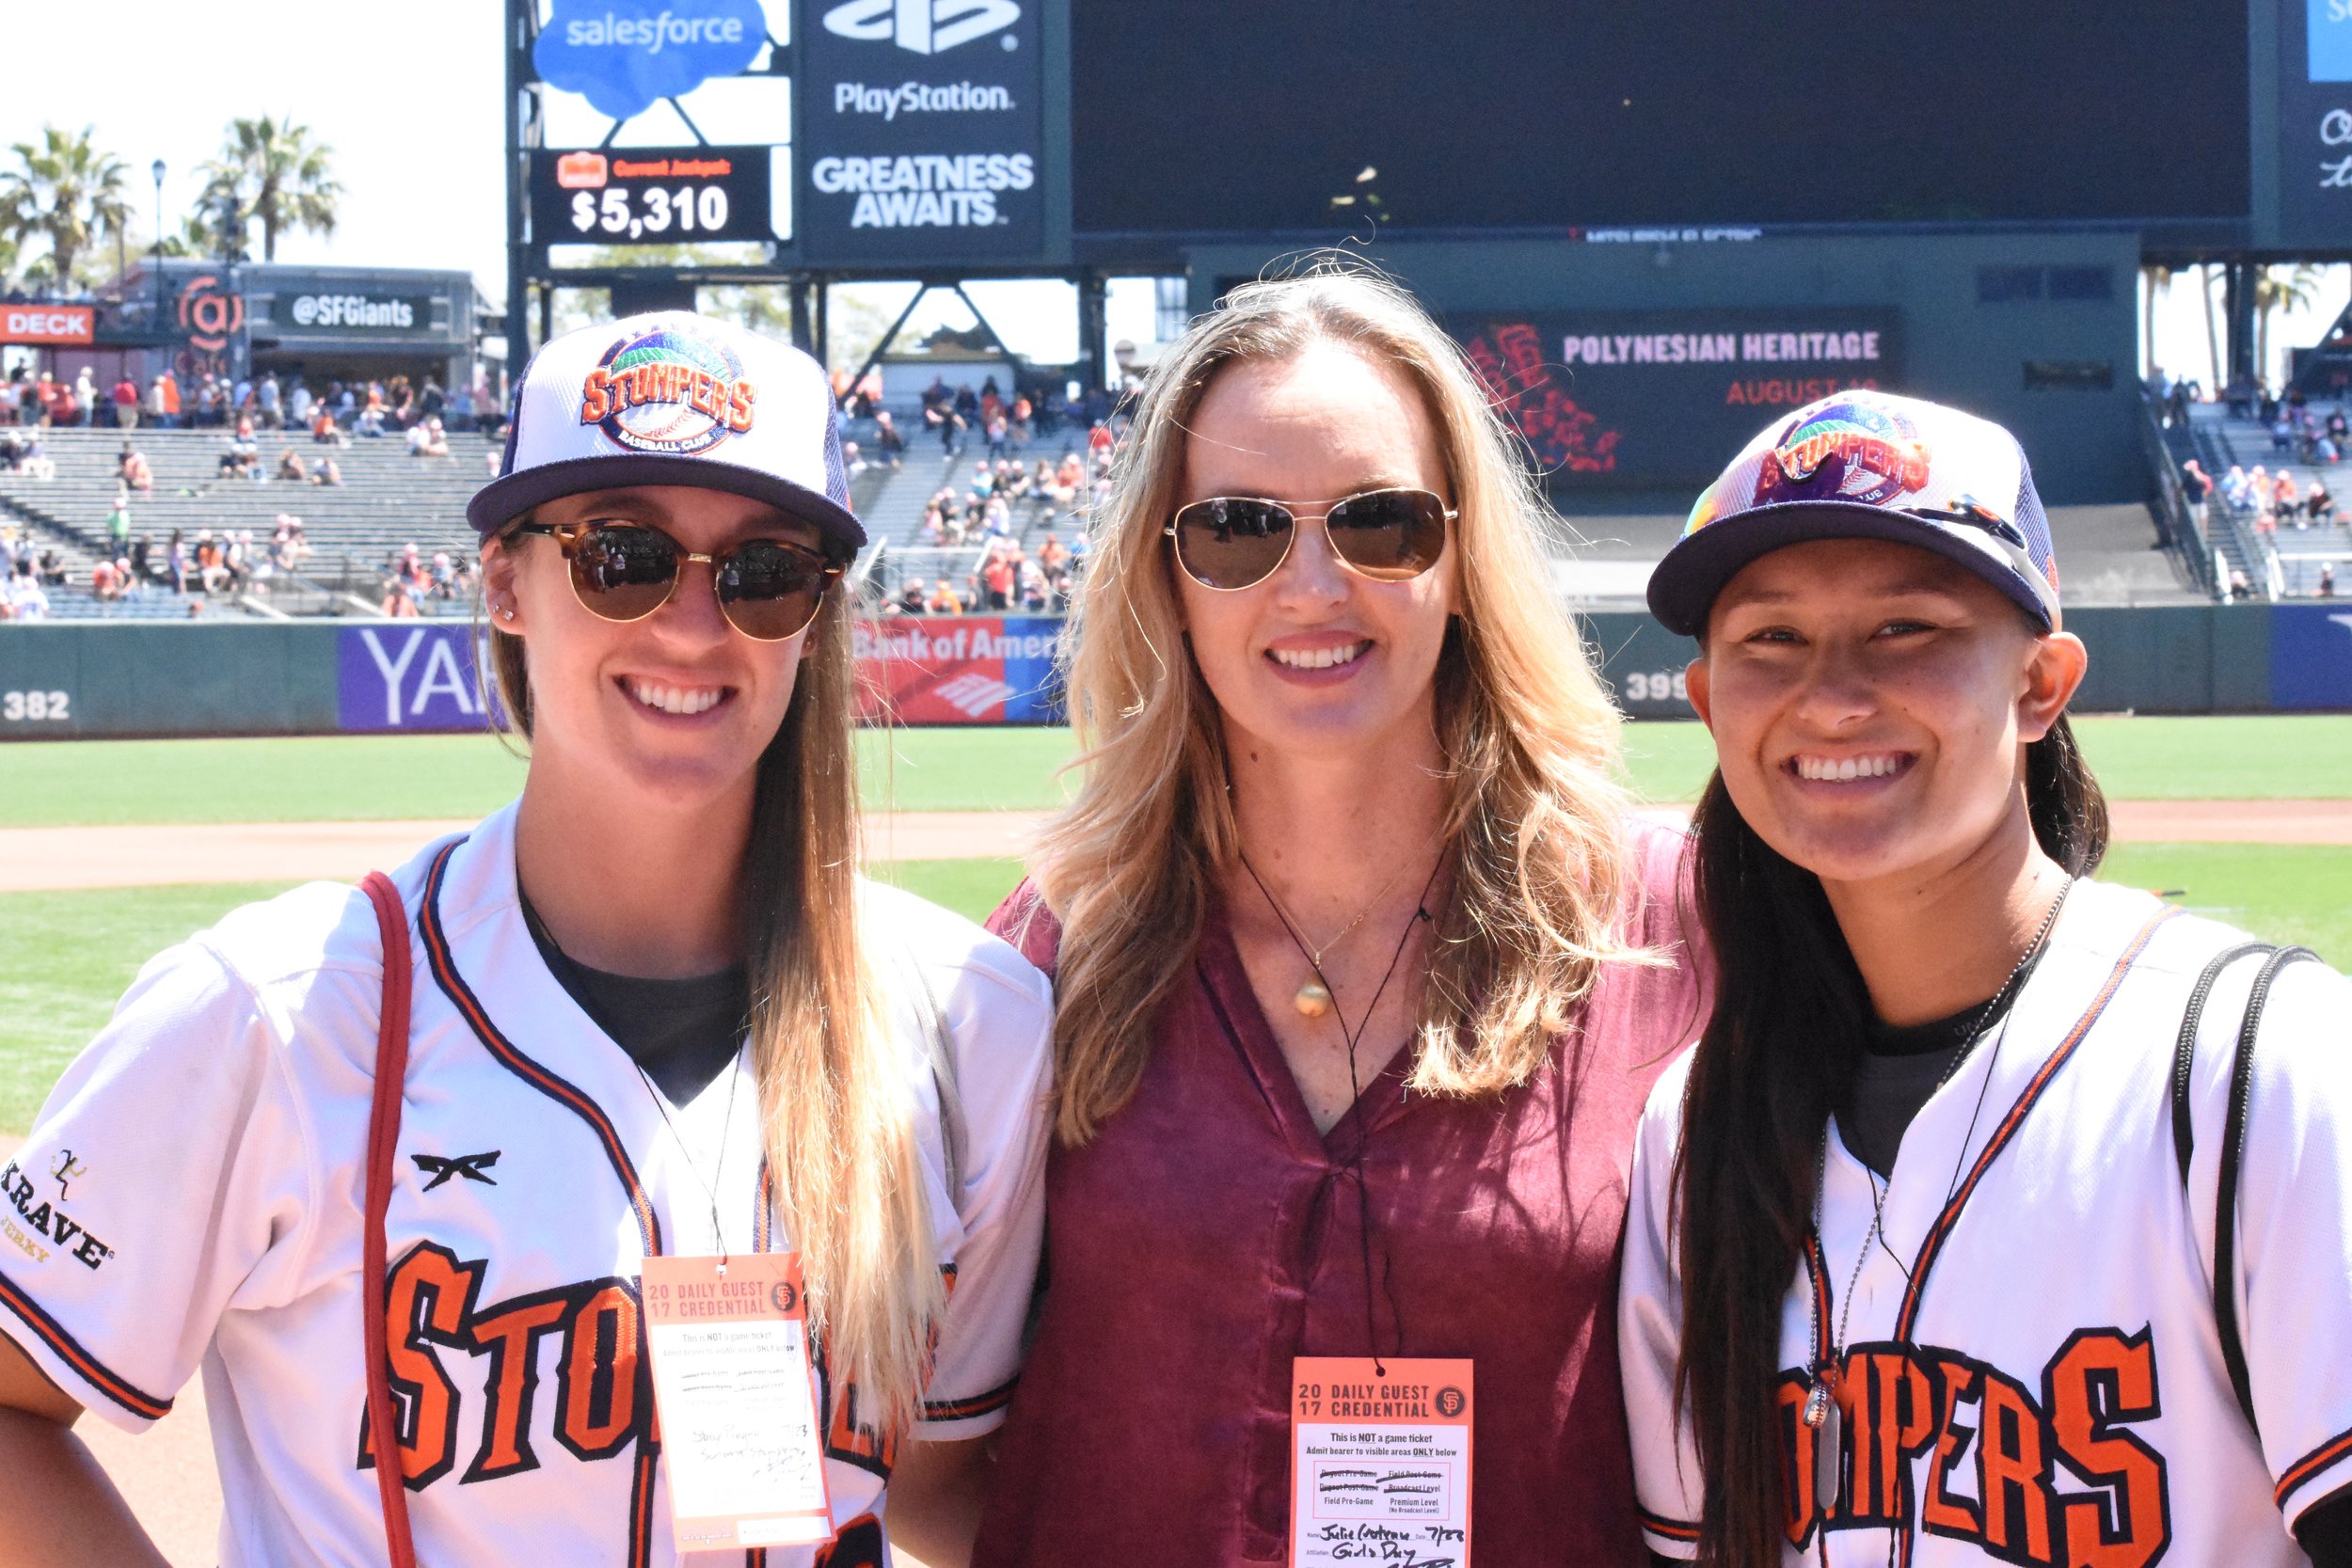  Stacy Piagno (left) and Kelsie Whitmore (right) pose with Julie Croteau, the first woman to play men's NCAA baseball, on the field at AT&amp;T Park on Sunday. (James W. Toy III / Sonoma Stompers) 